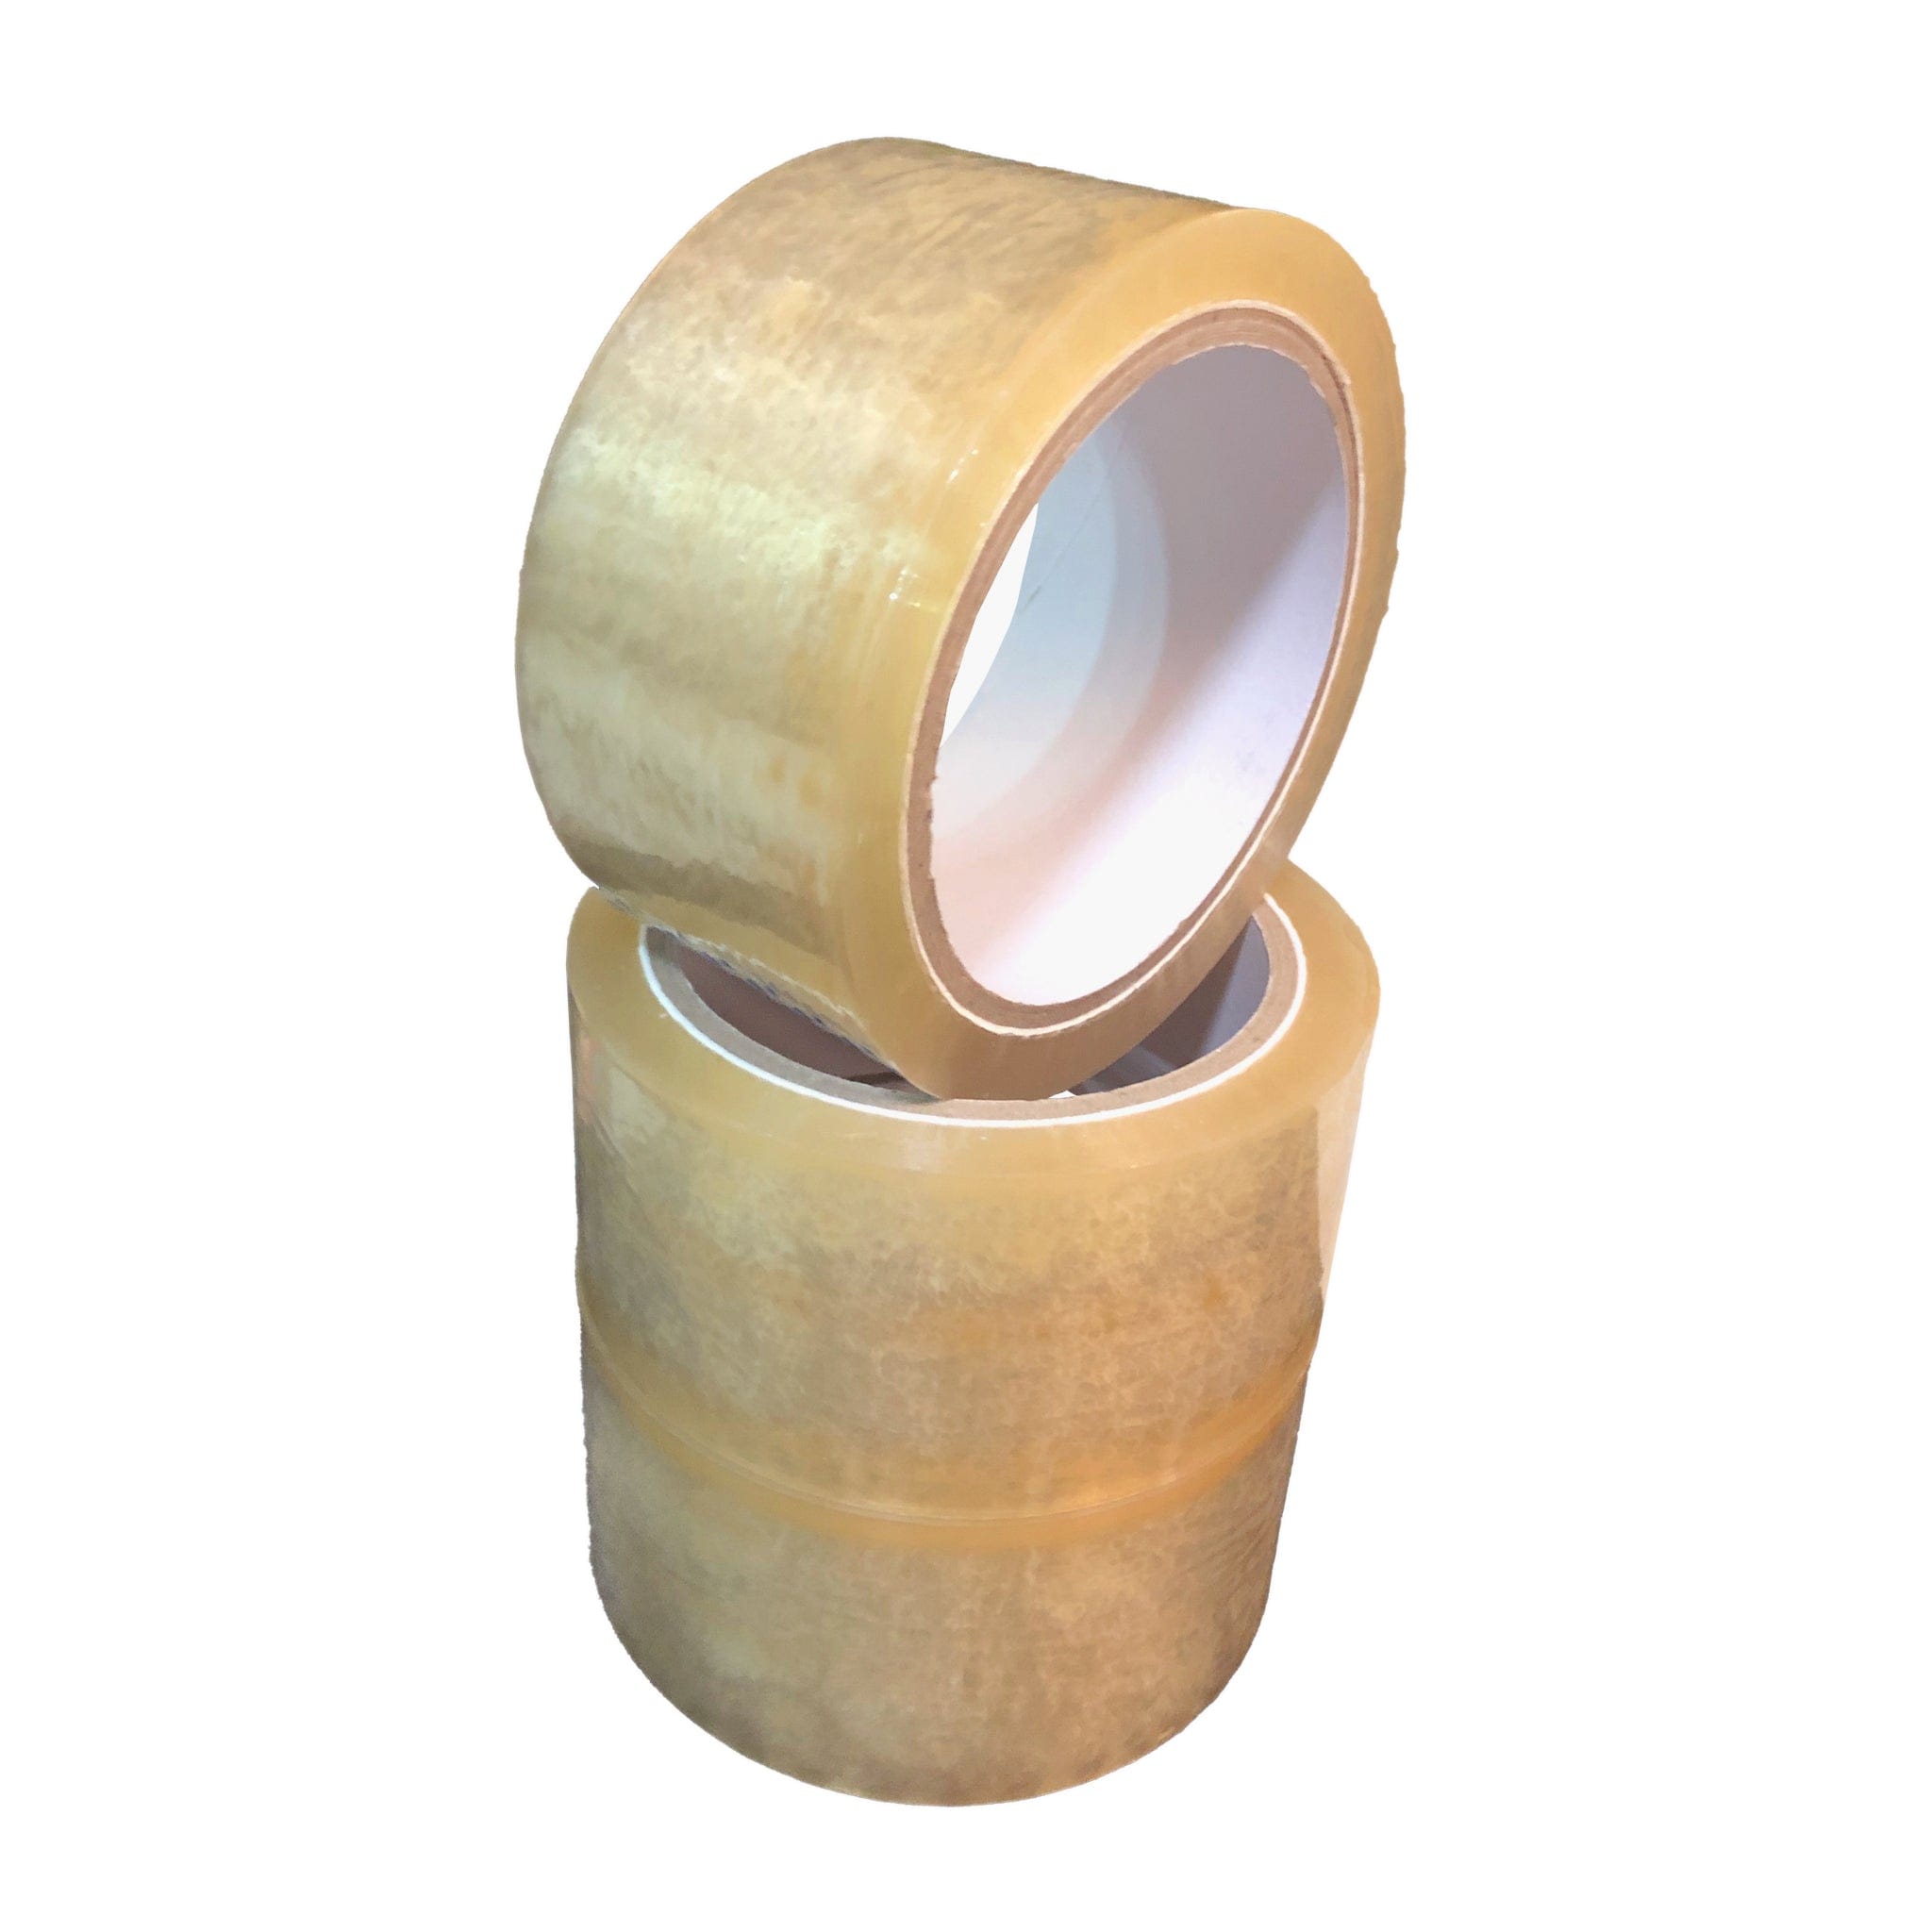 Eco-friednly NEON Biodegradable Cellulose Tape 50mm